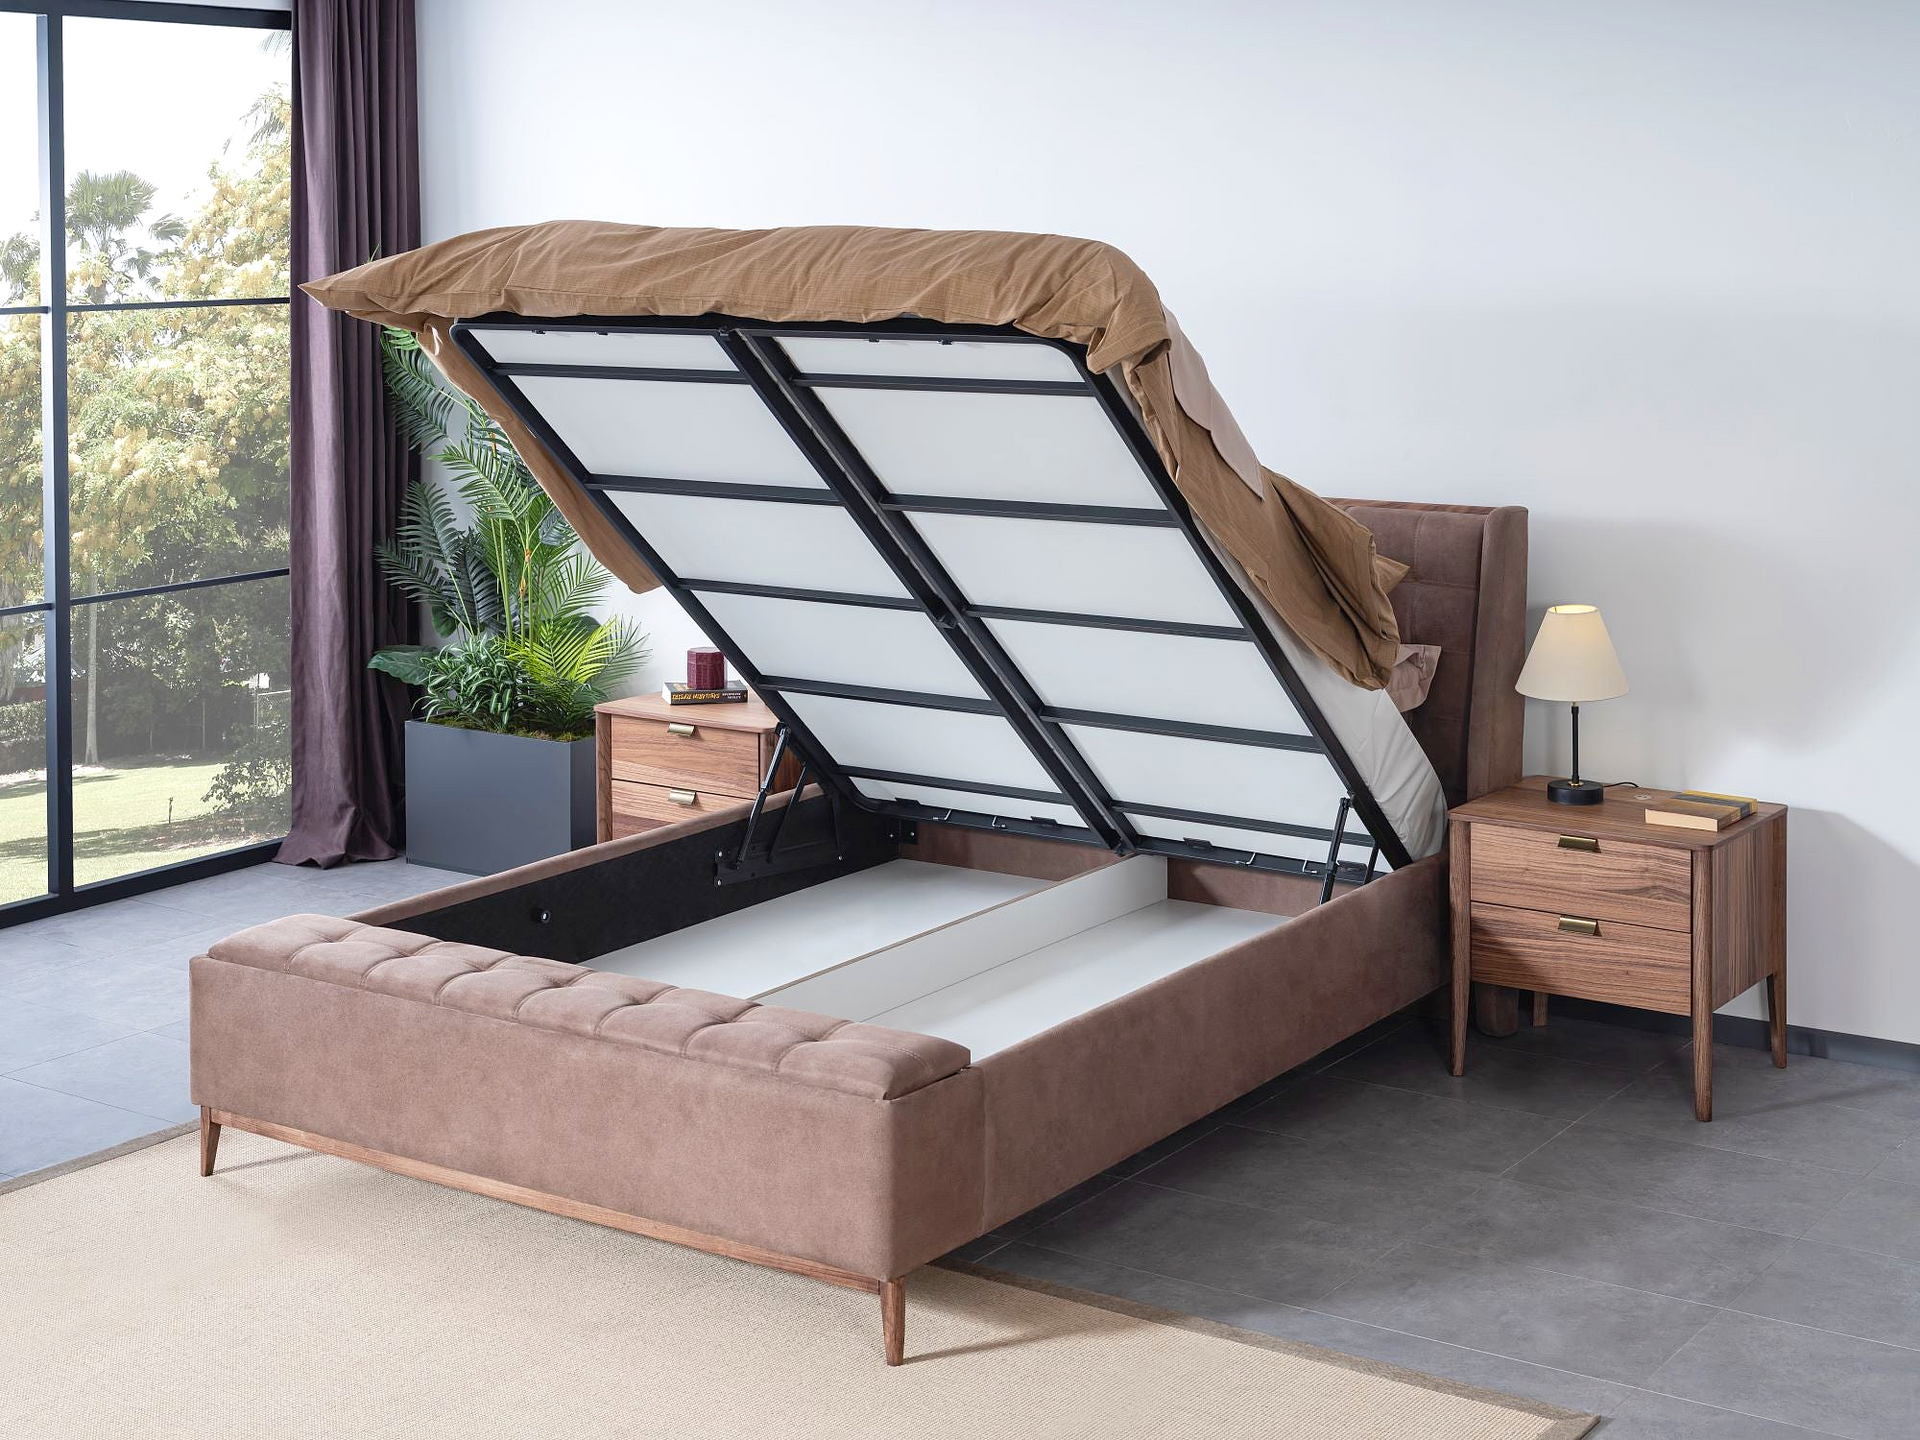 a bed that has a mattress in it